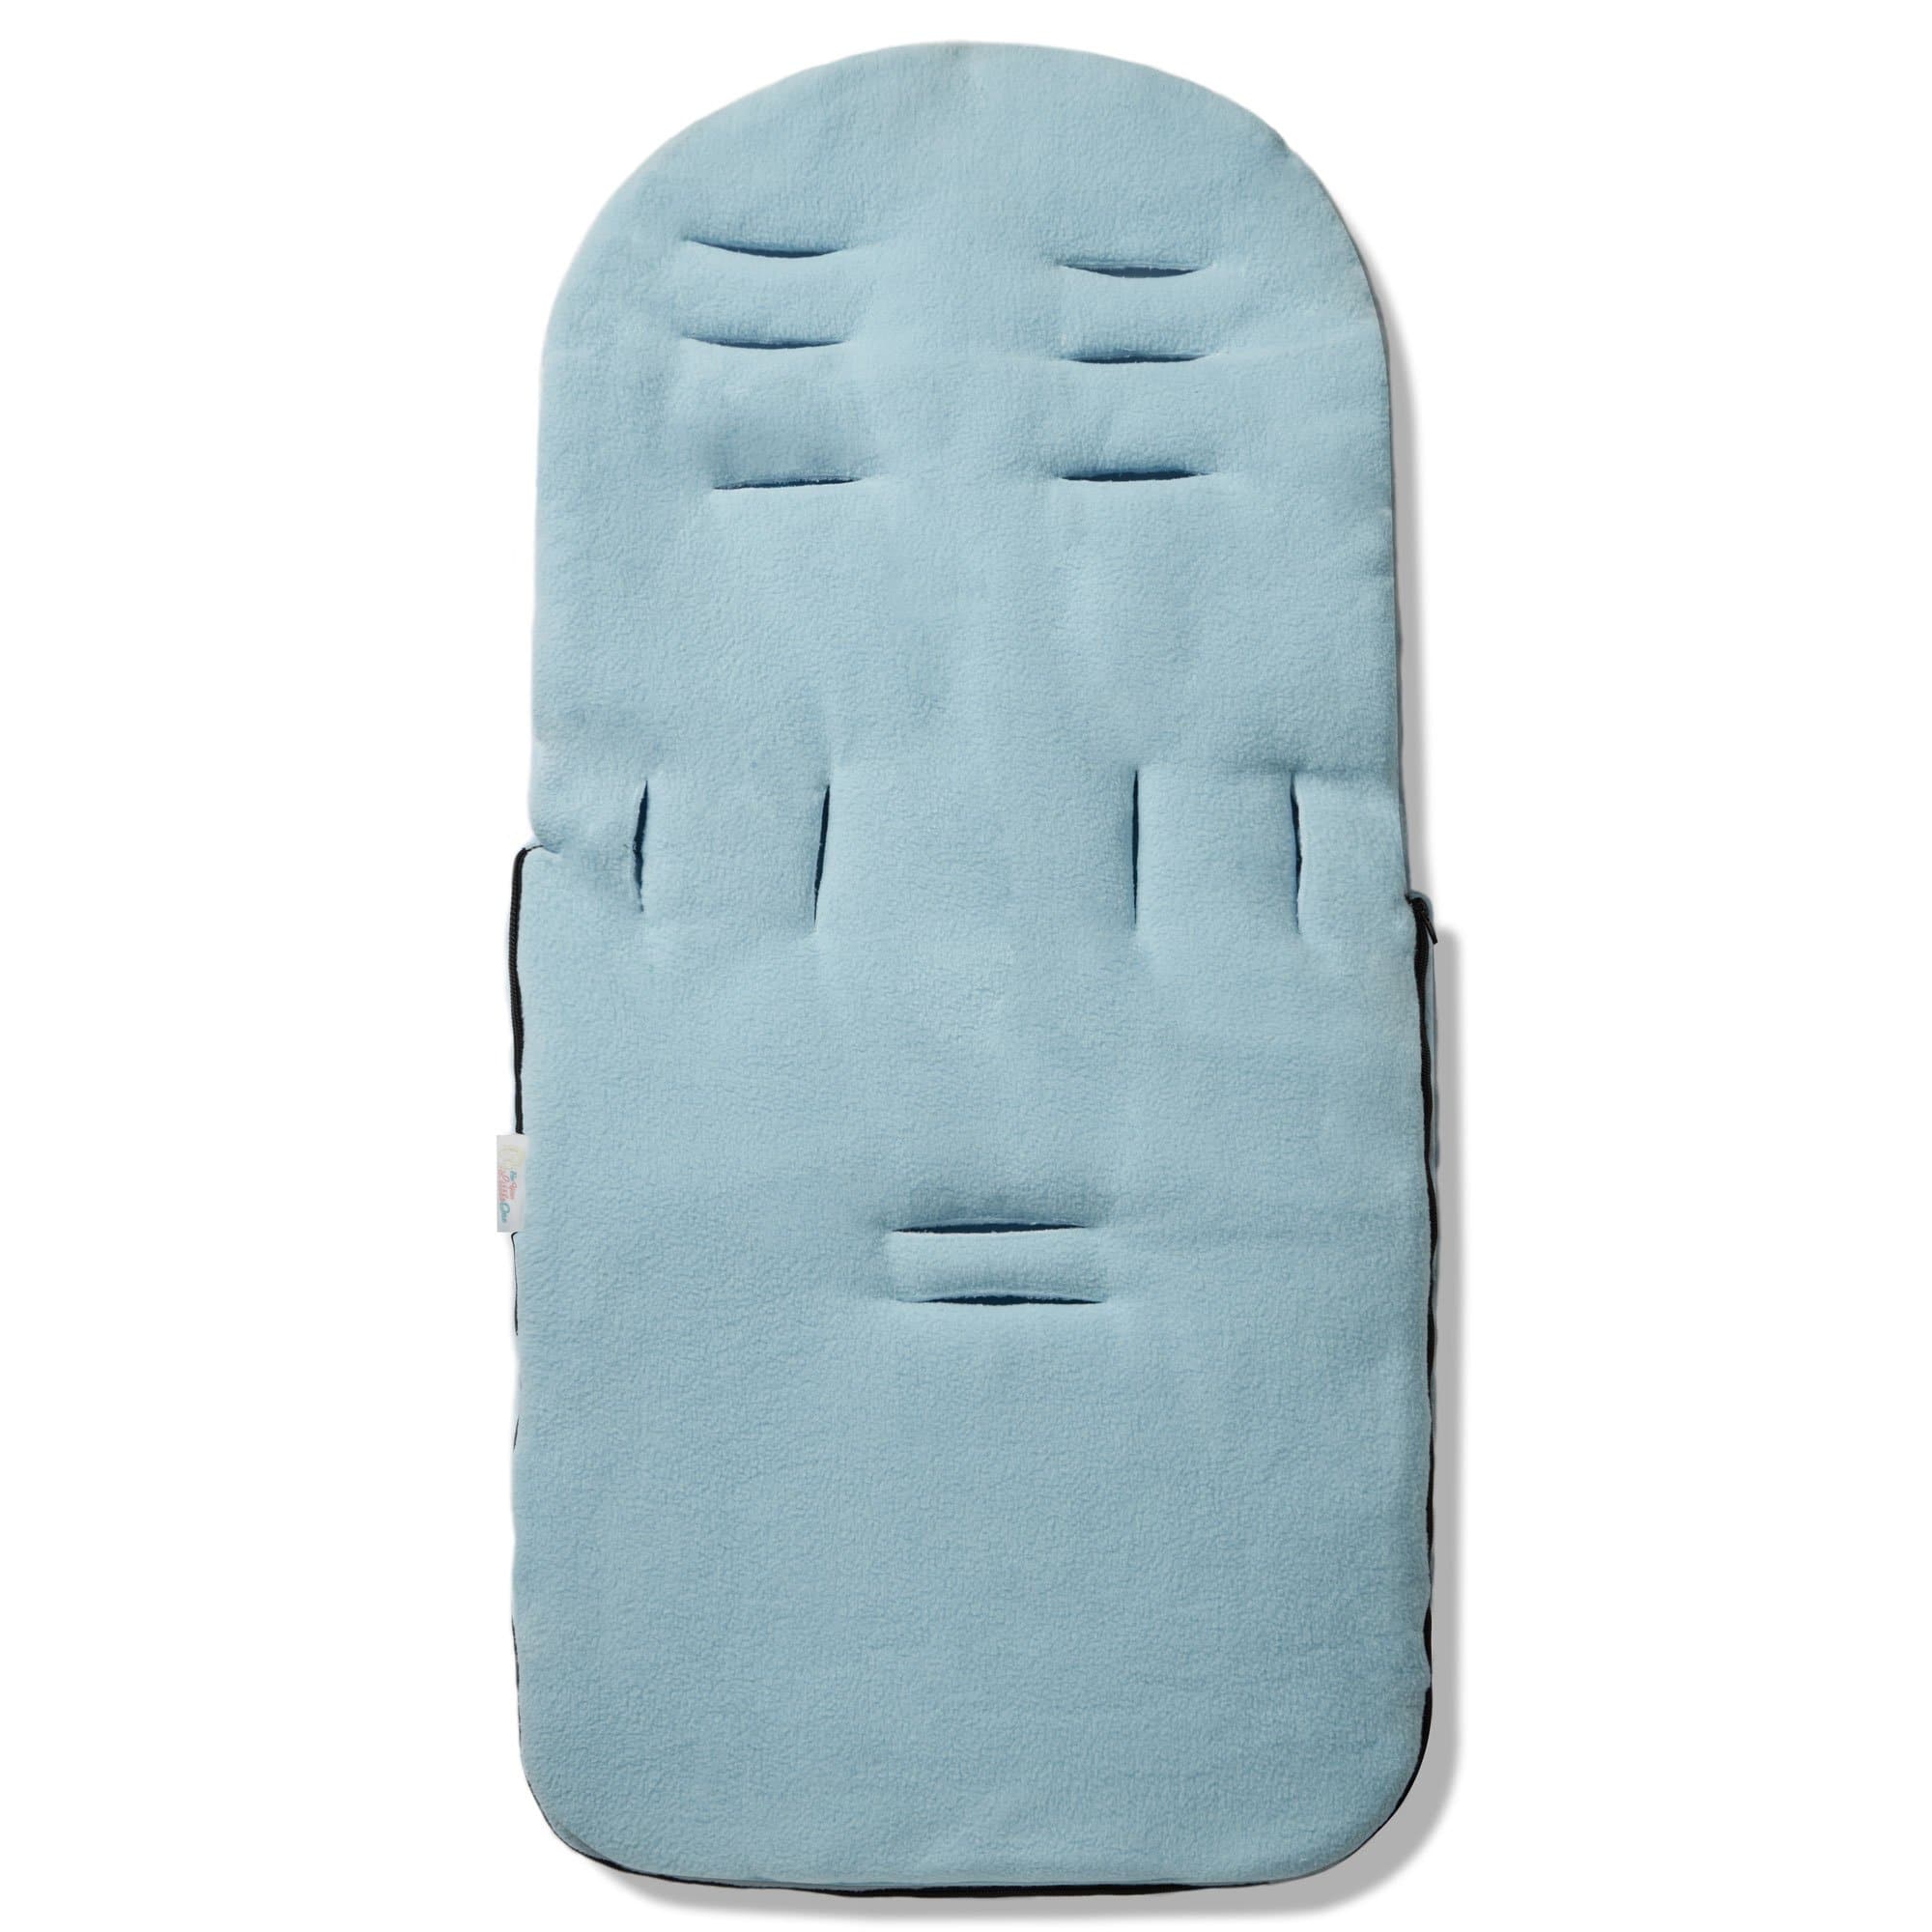 Dimple Footmuff / Cosy Toes Compatible with Inglesina -  | For Your Little One